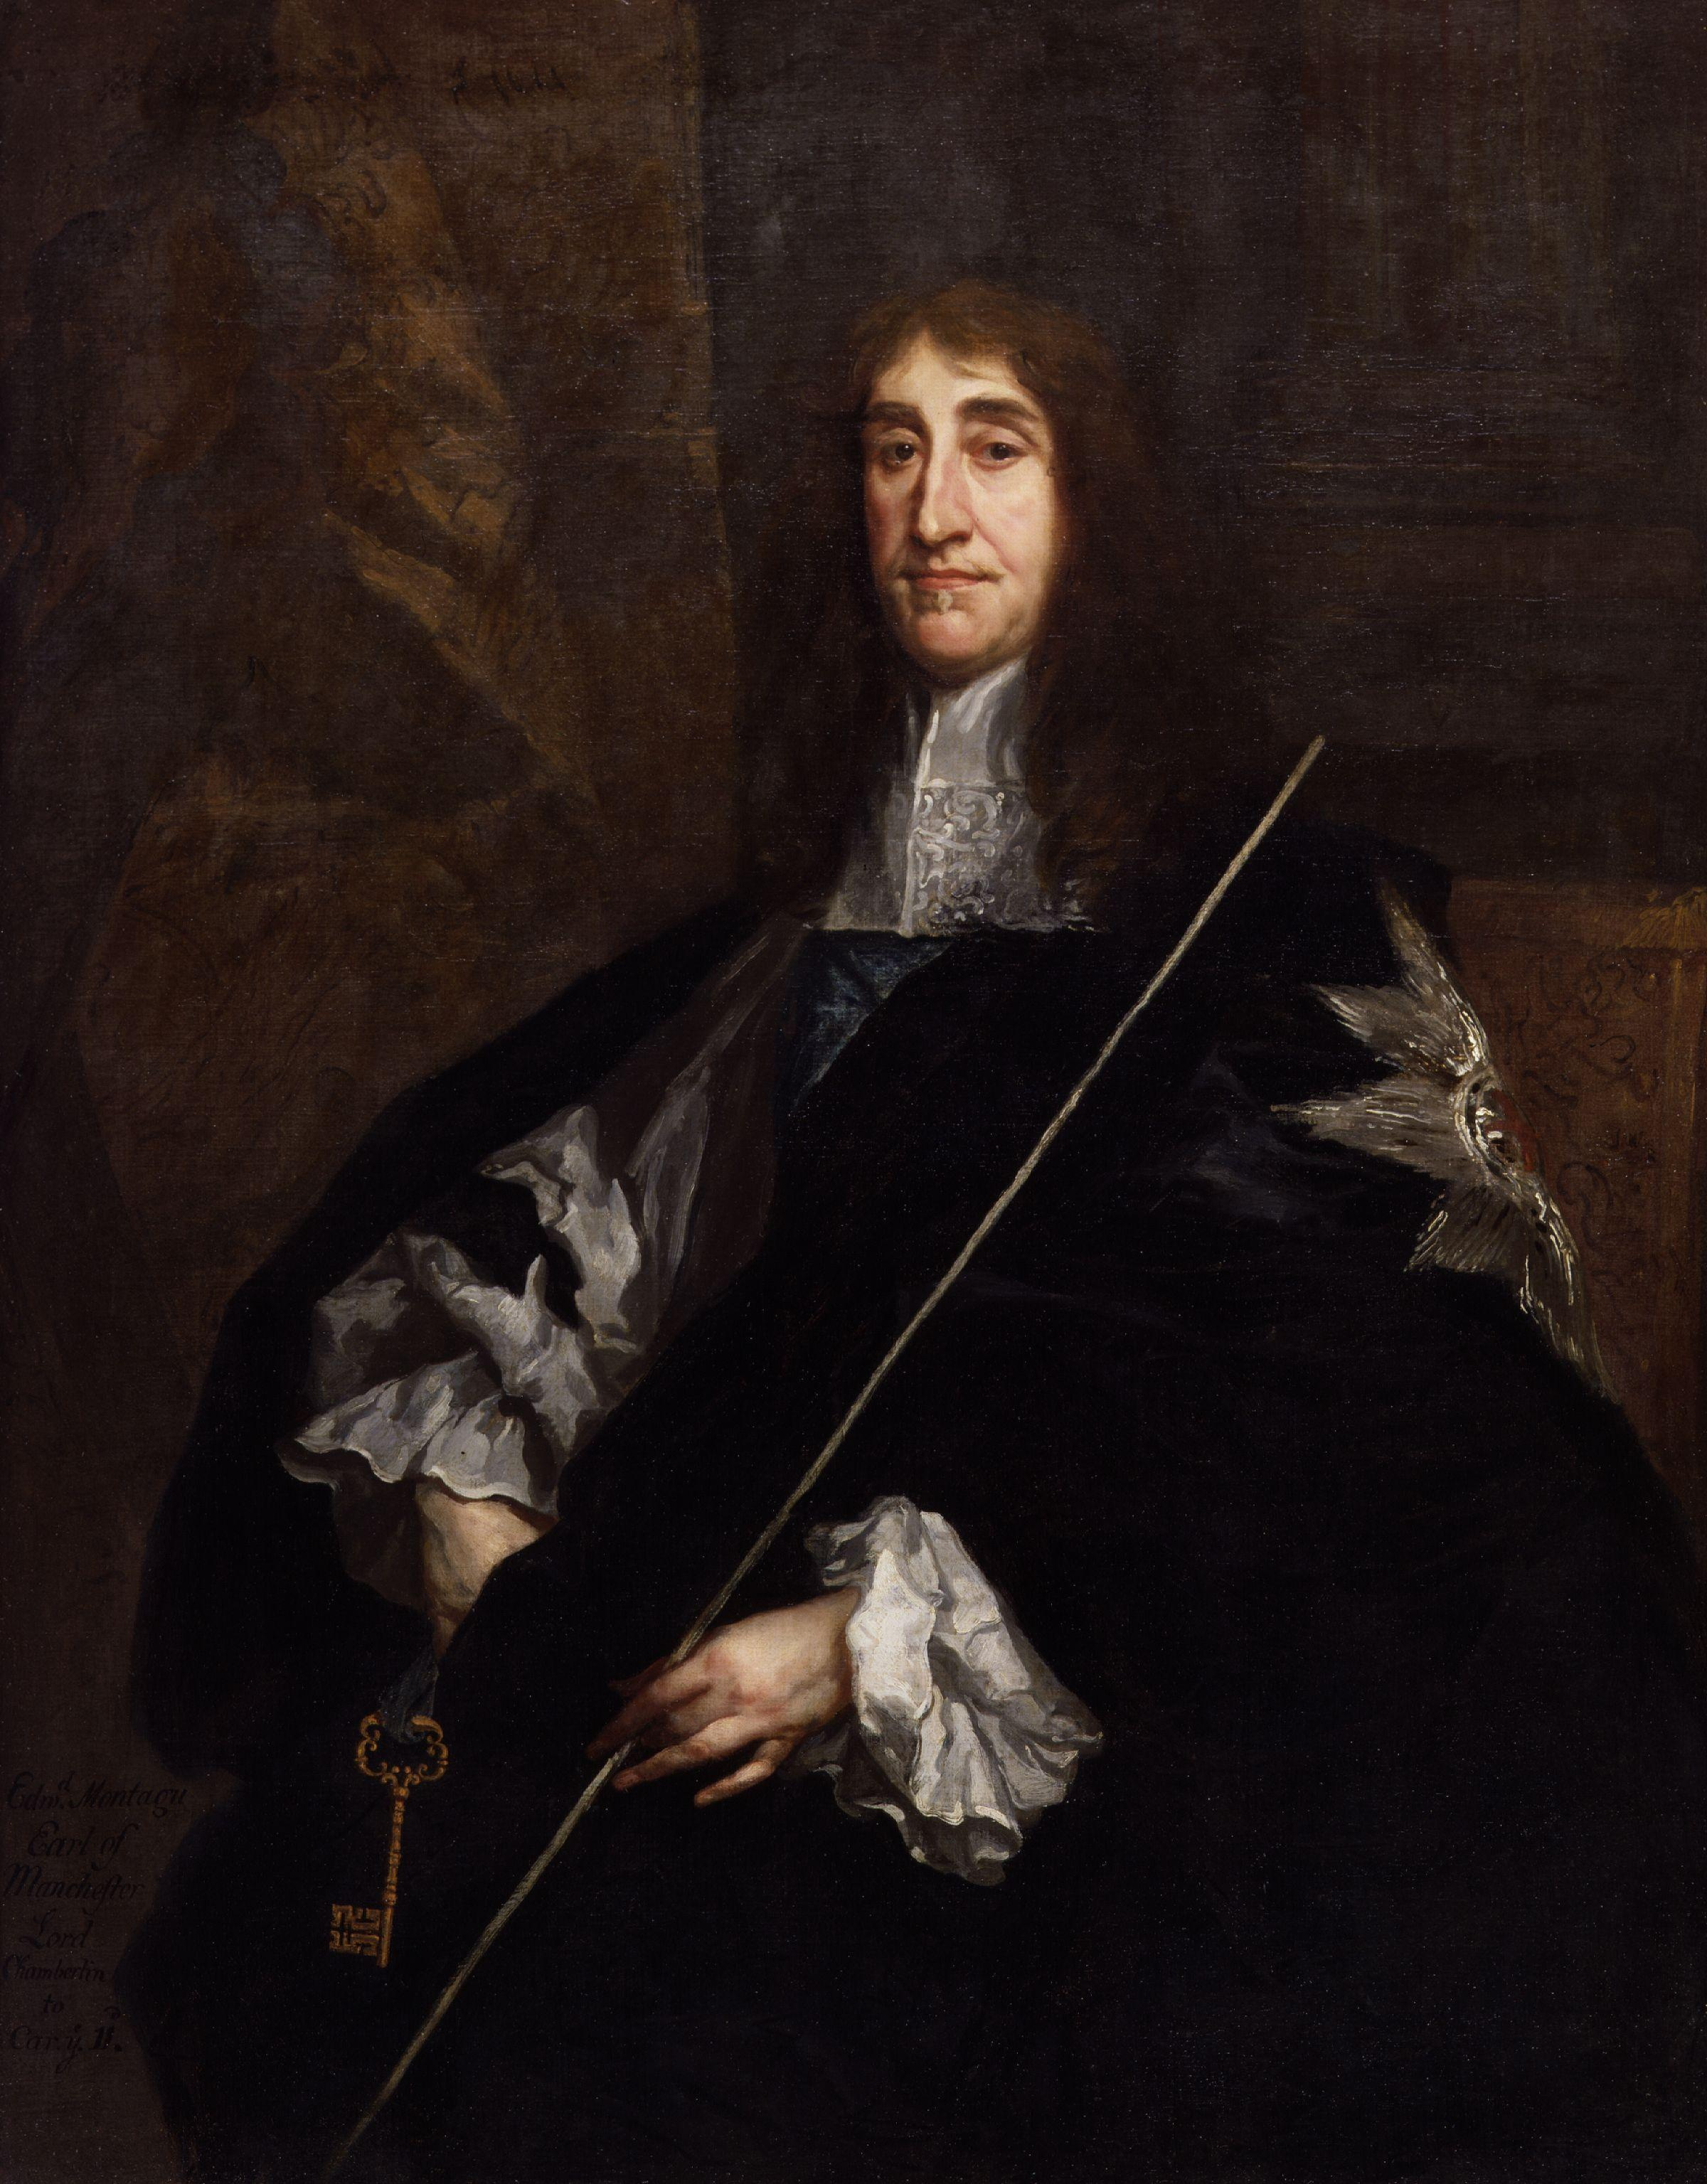 Edward Montagu, 2nd Earl of Manchester by Sir Peter Lely (2)